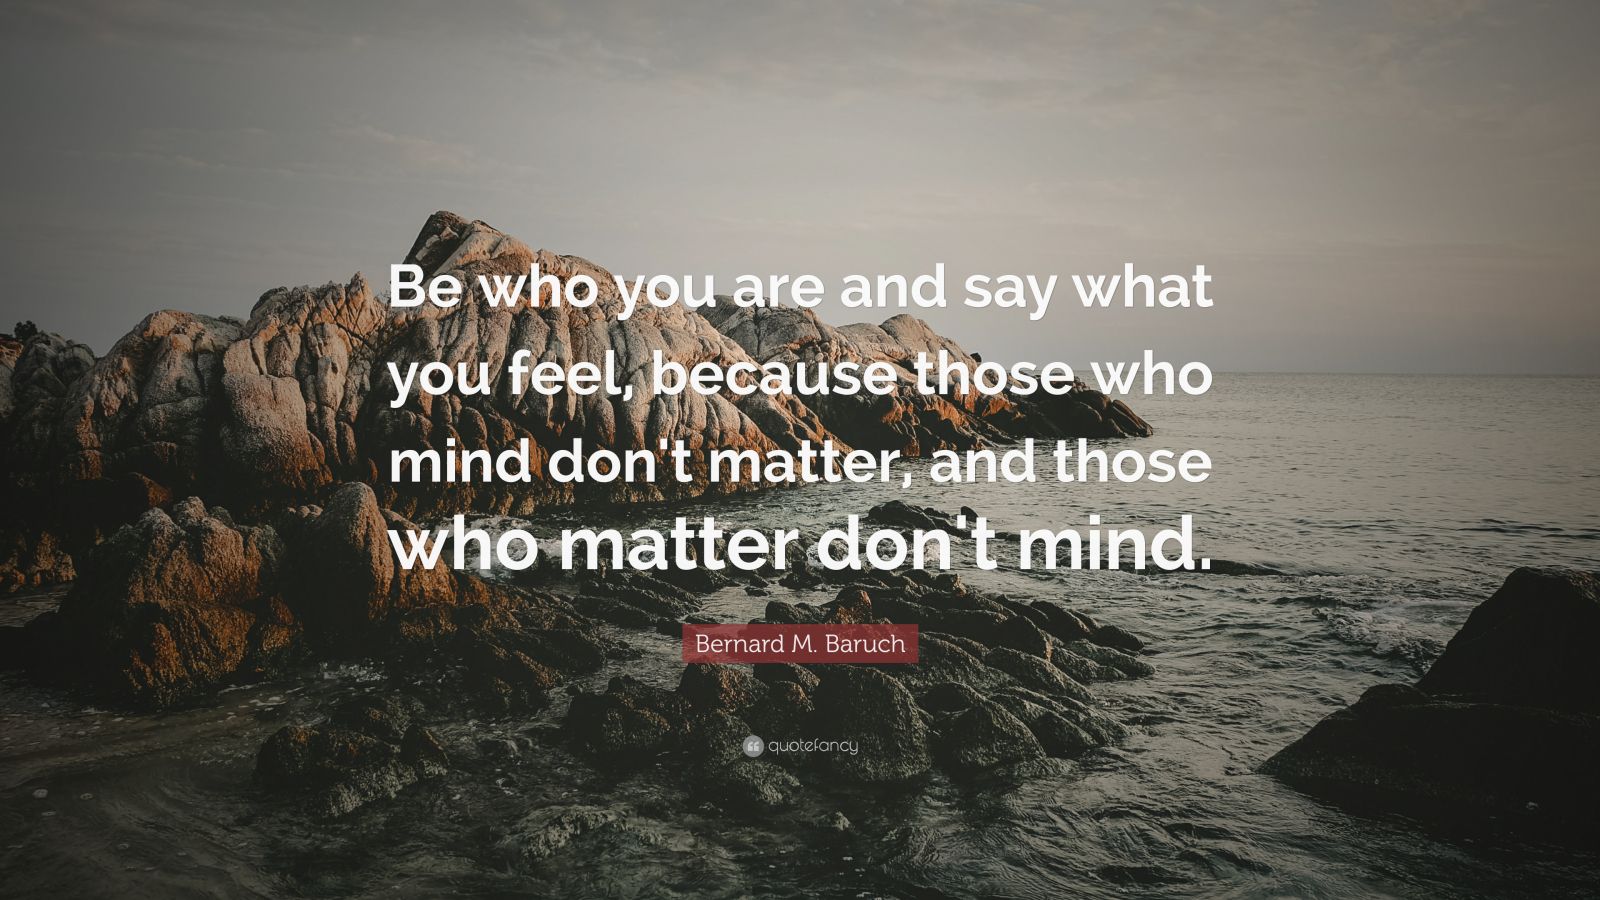 Bernard M. Baruch Quote: “Be who you are and say what you feel, because